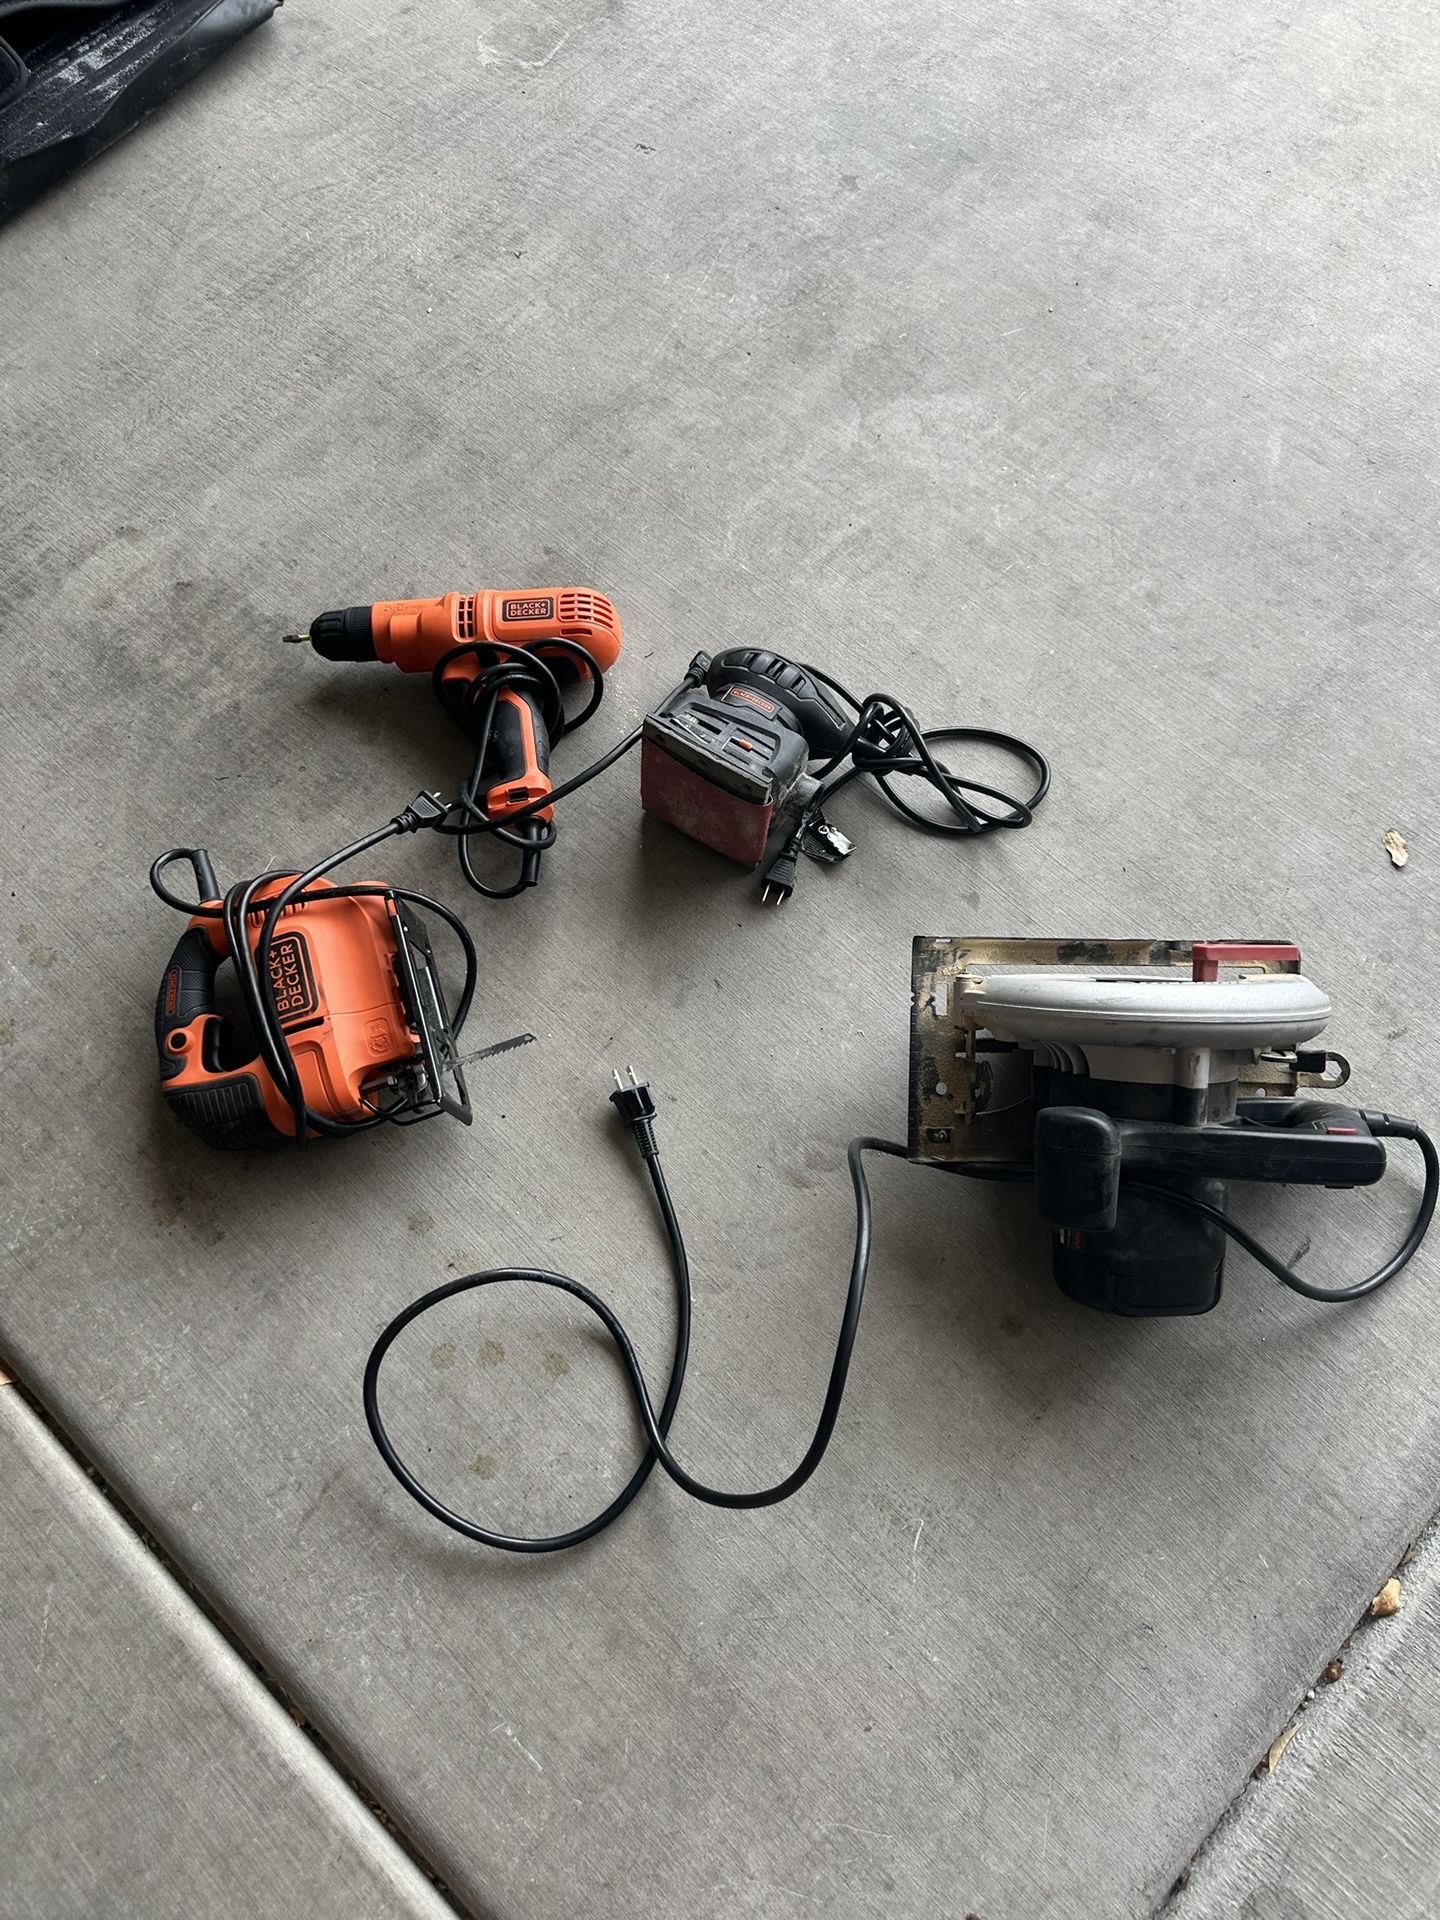 Black And Decker And Skills Power Tools Like New